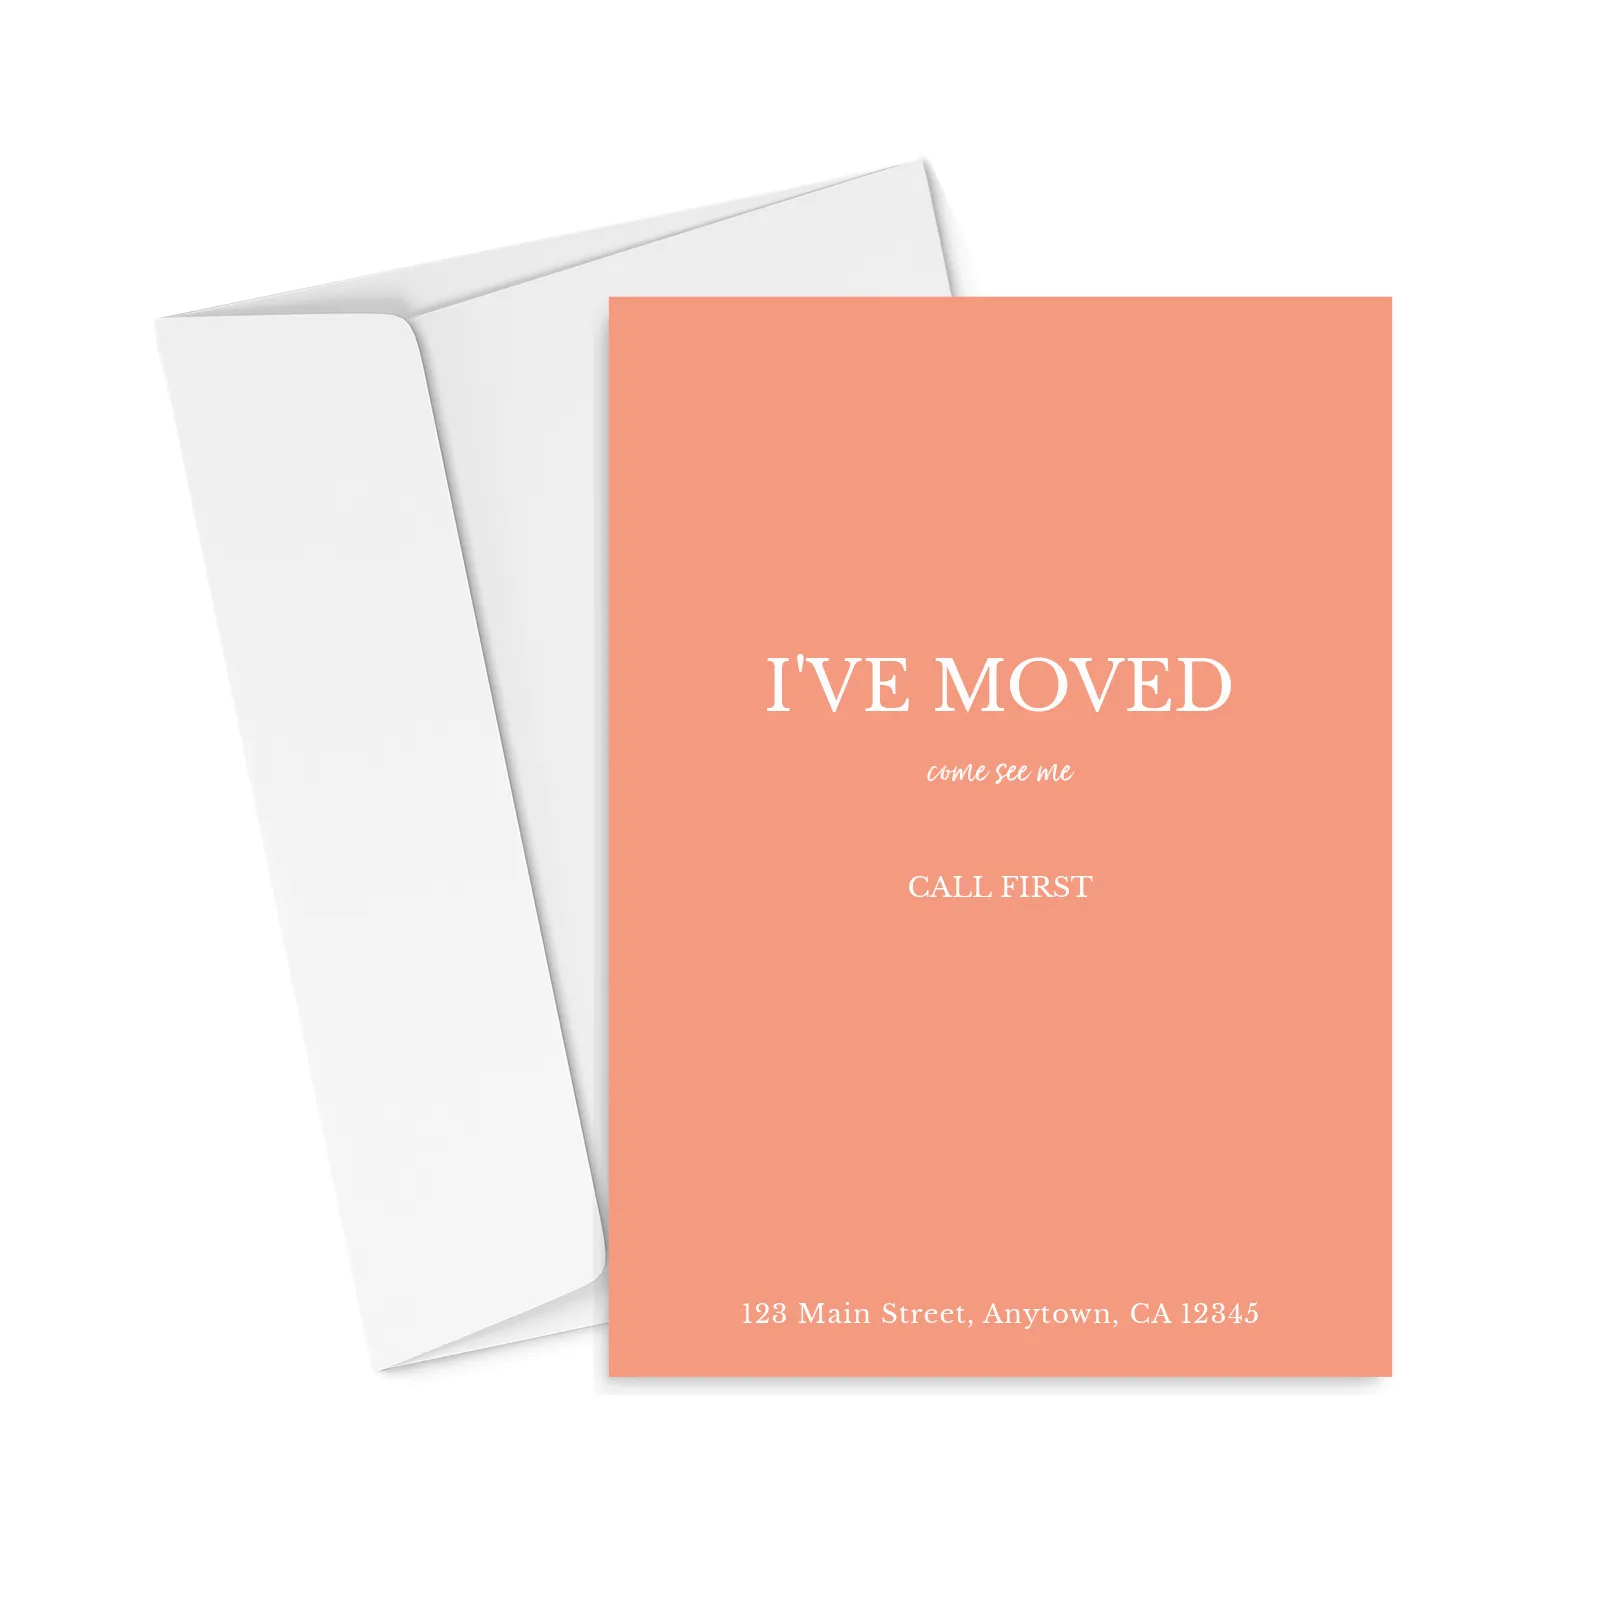 We Moved - Call First - Peach